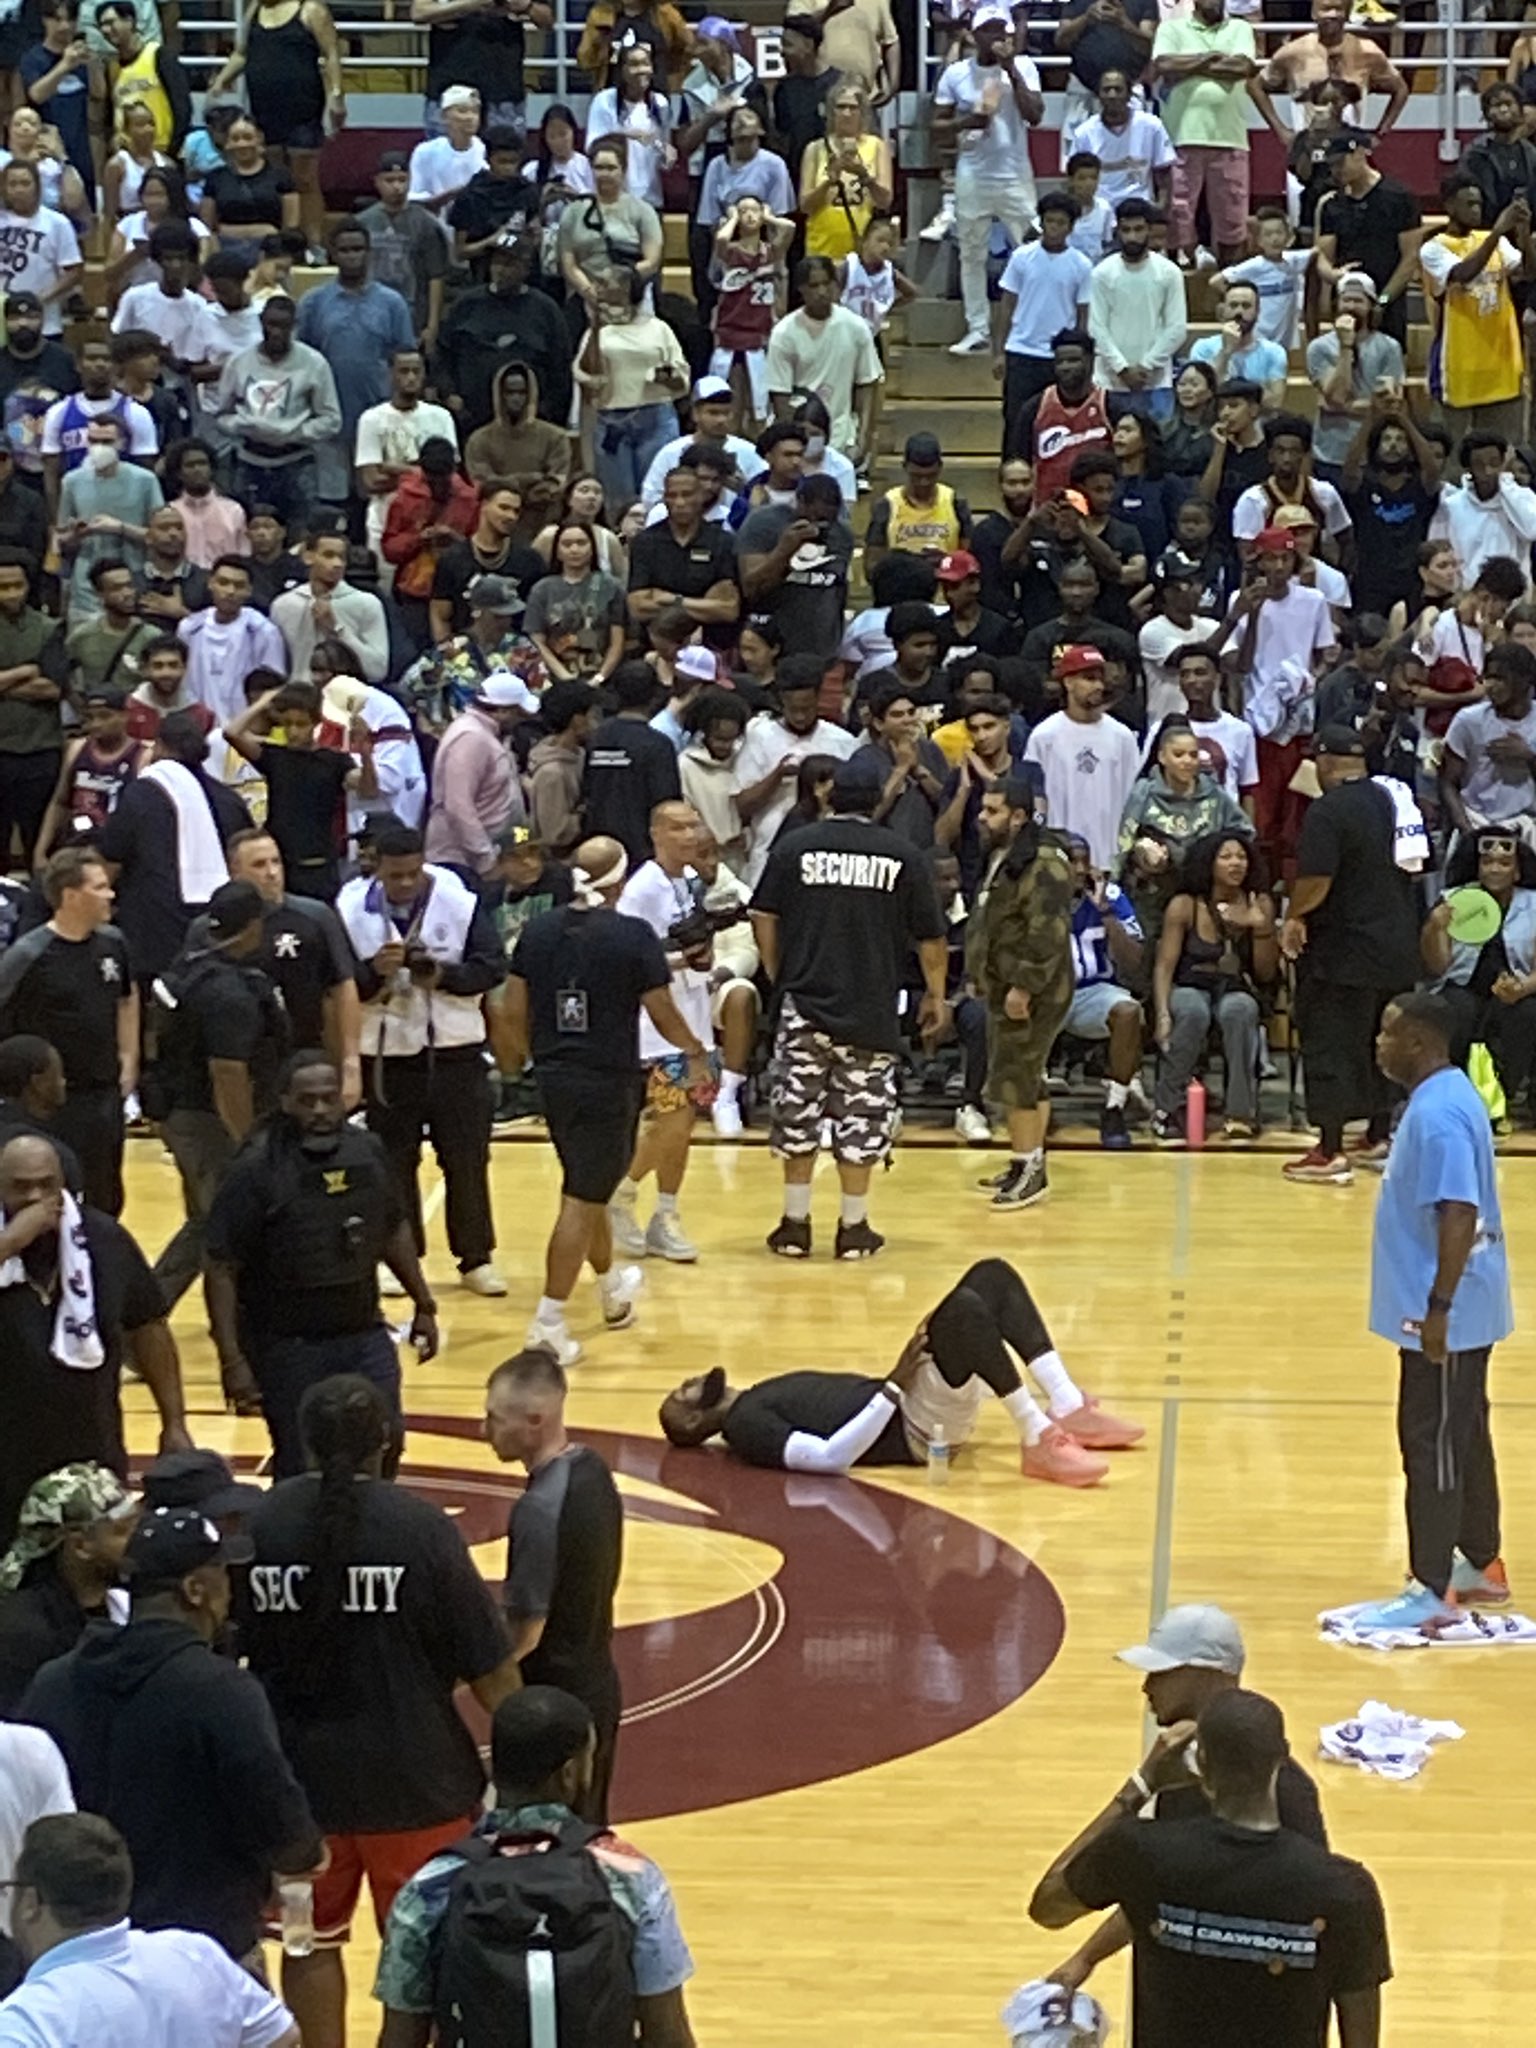 LeBron James' CrawsOver Game Gets Called Off Midway Through The